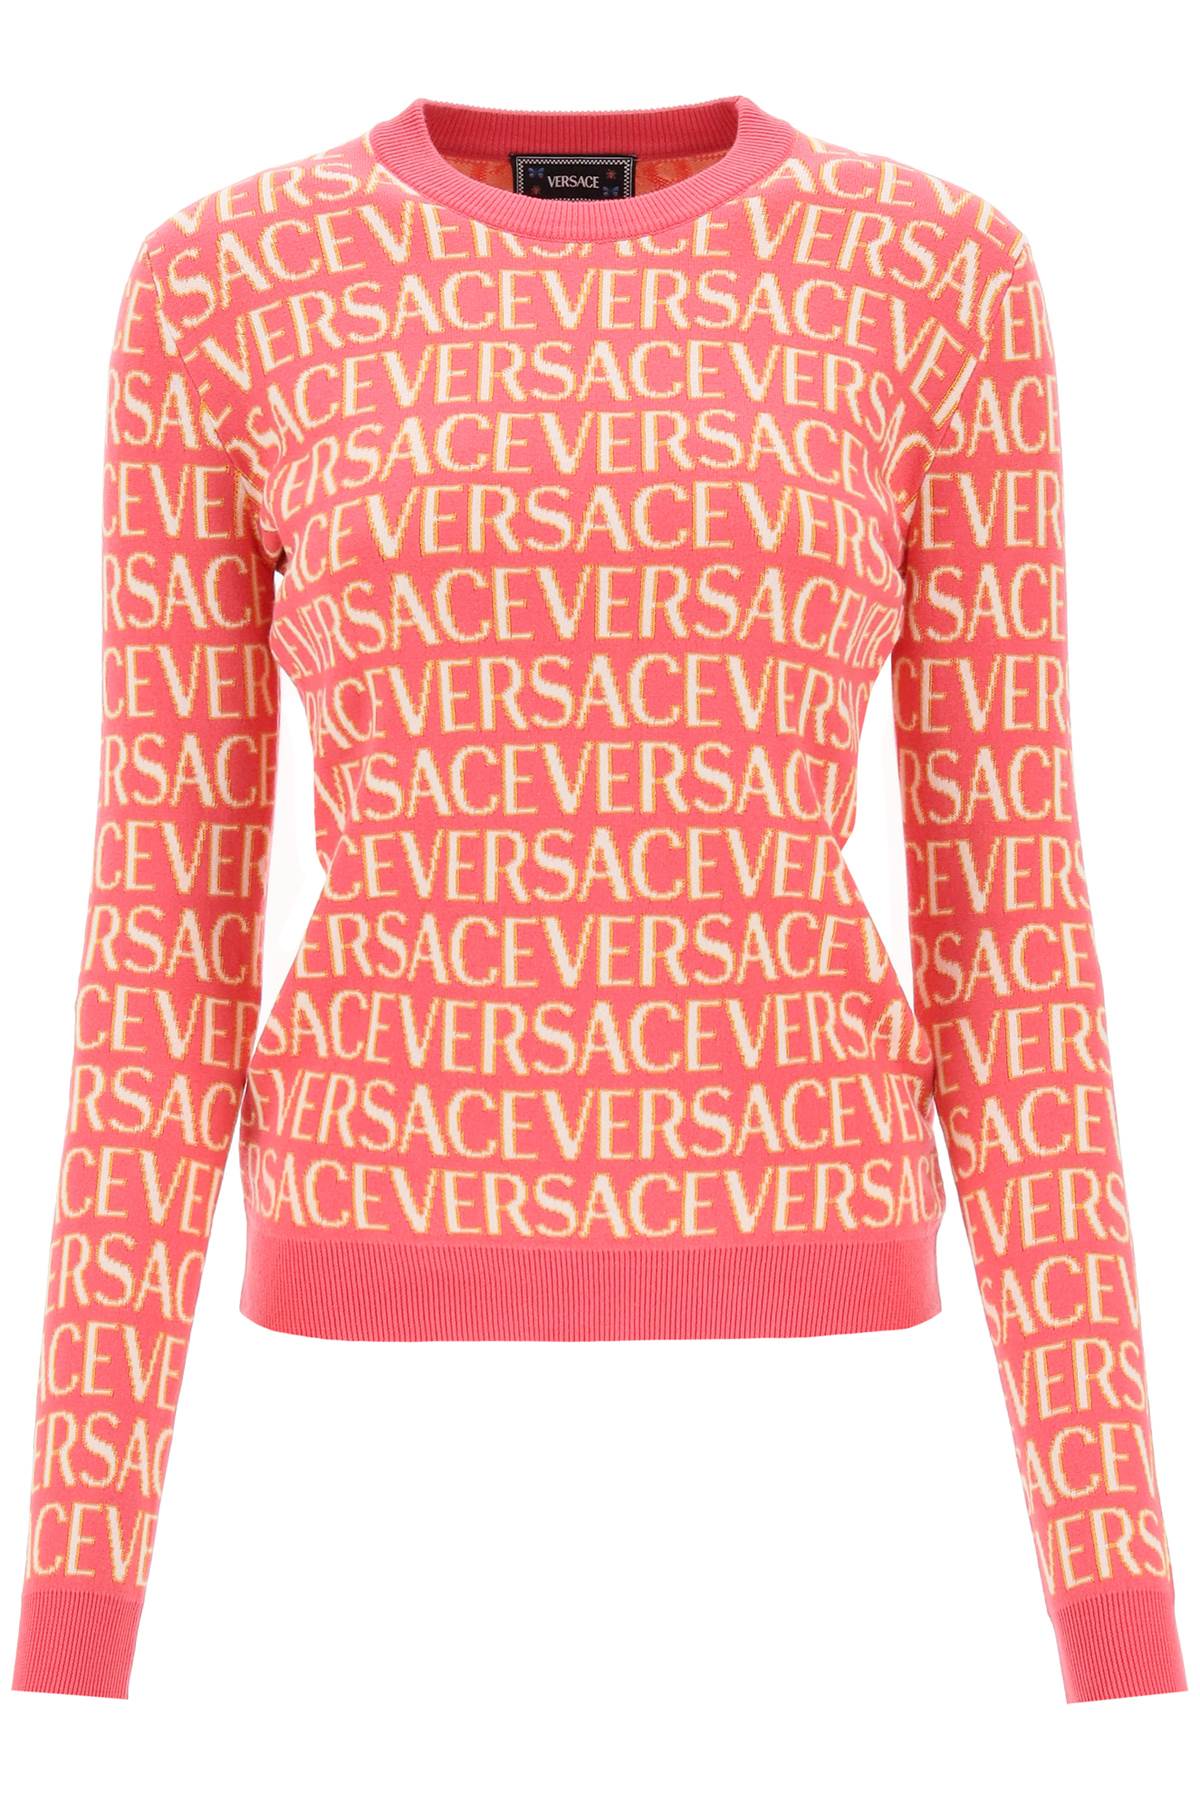 Versace 'versace allover' crew-neck sweater 1011218 1A07960 FUXIA PINK